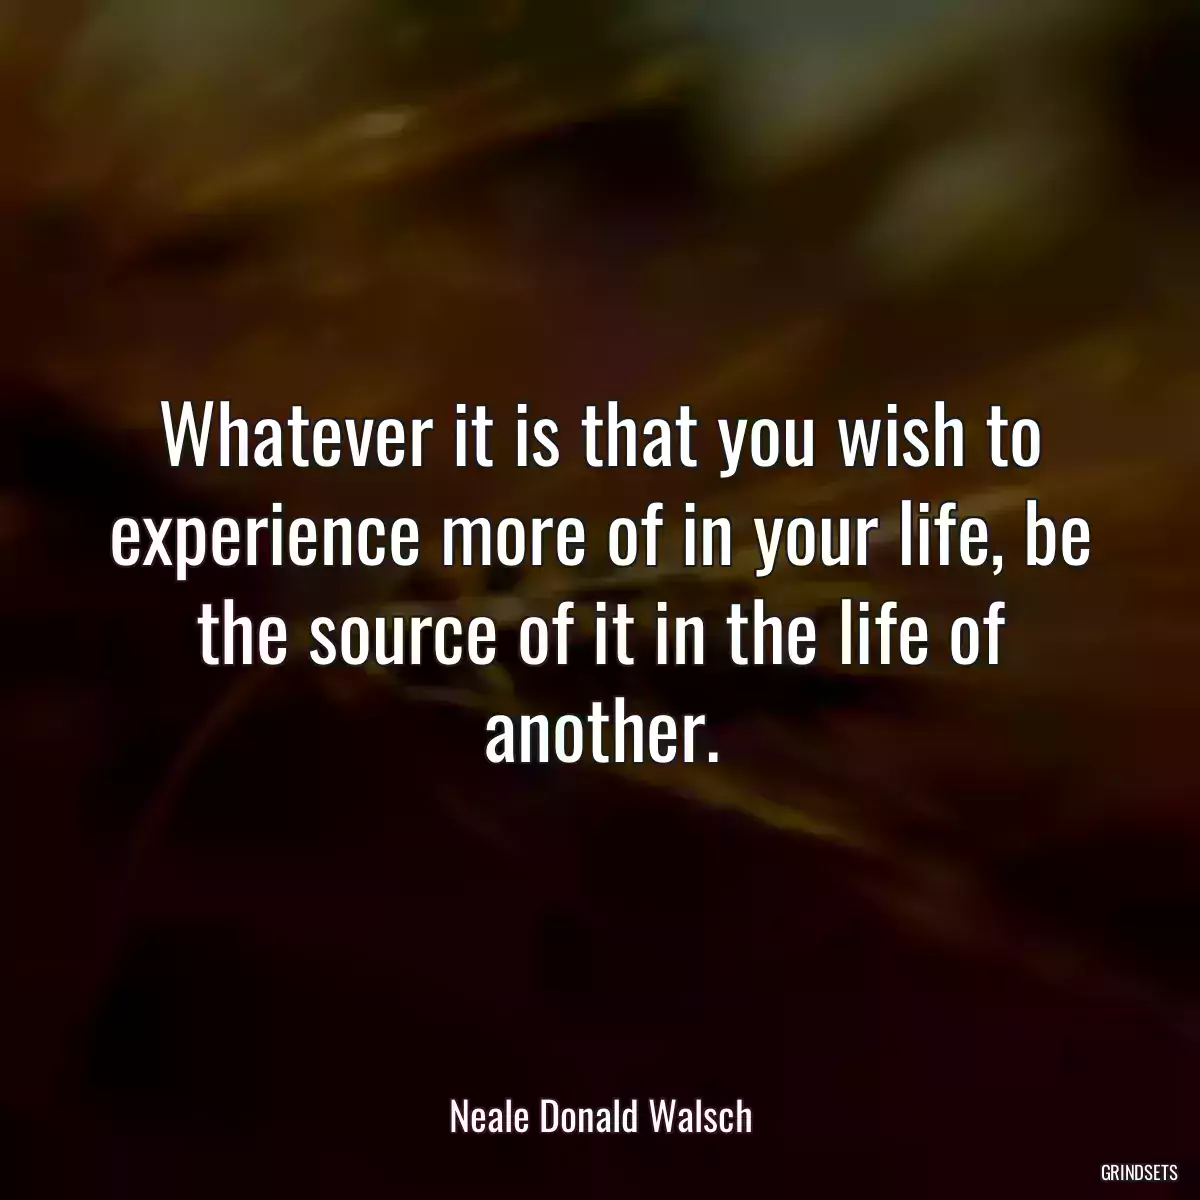 Whatever it is that you wish to experience more of in your life, be the source of it in the life of another.